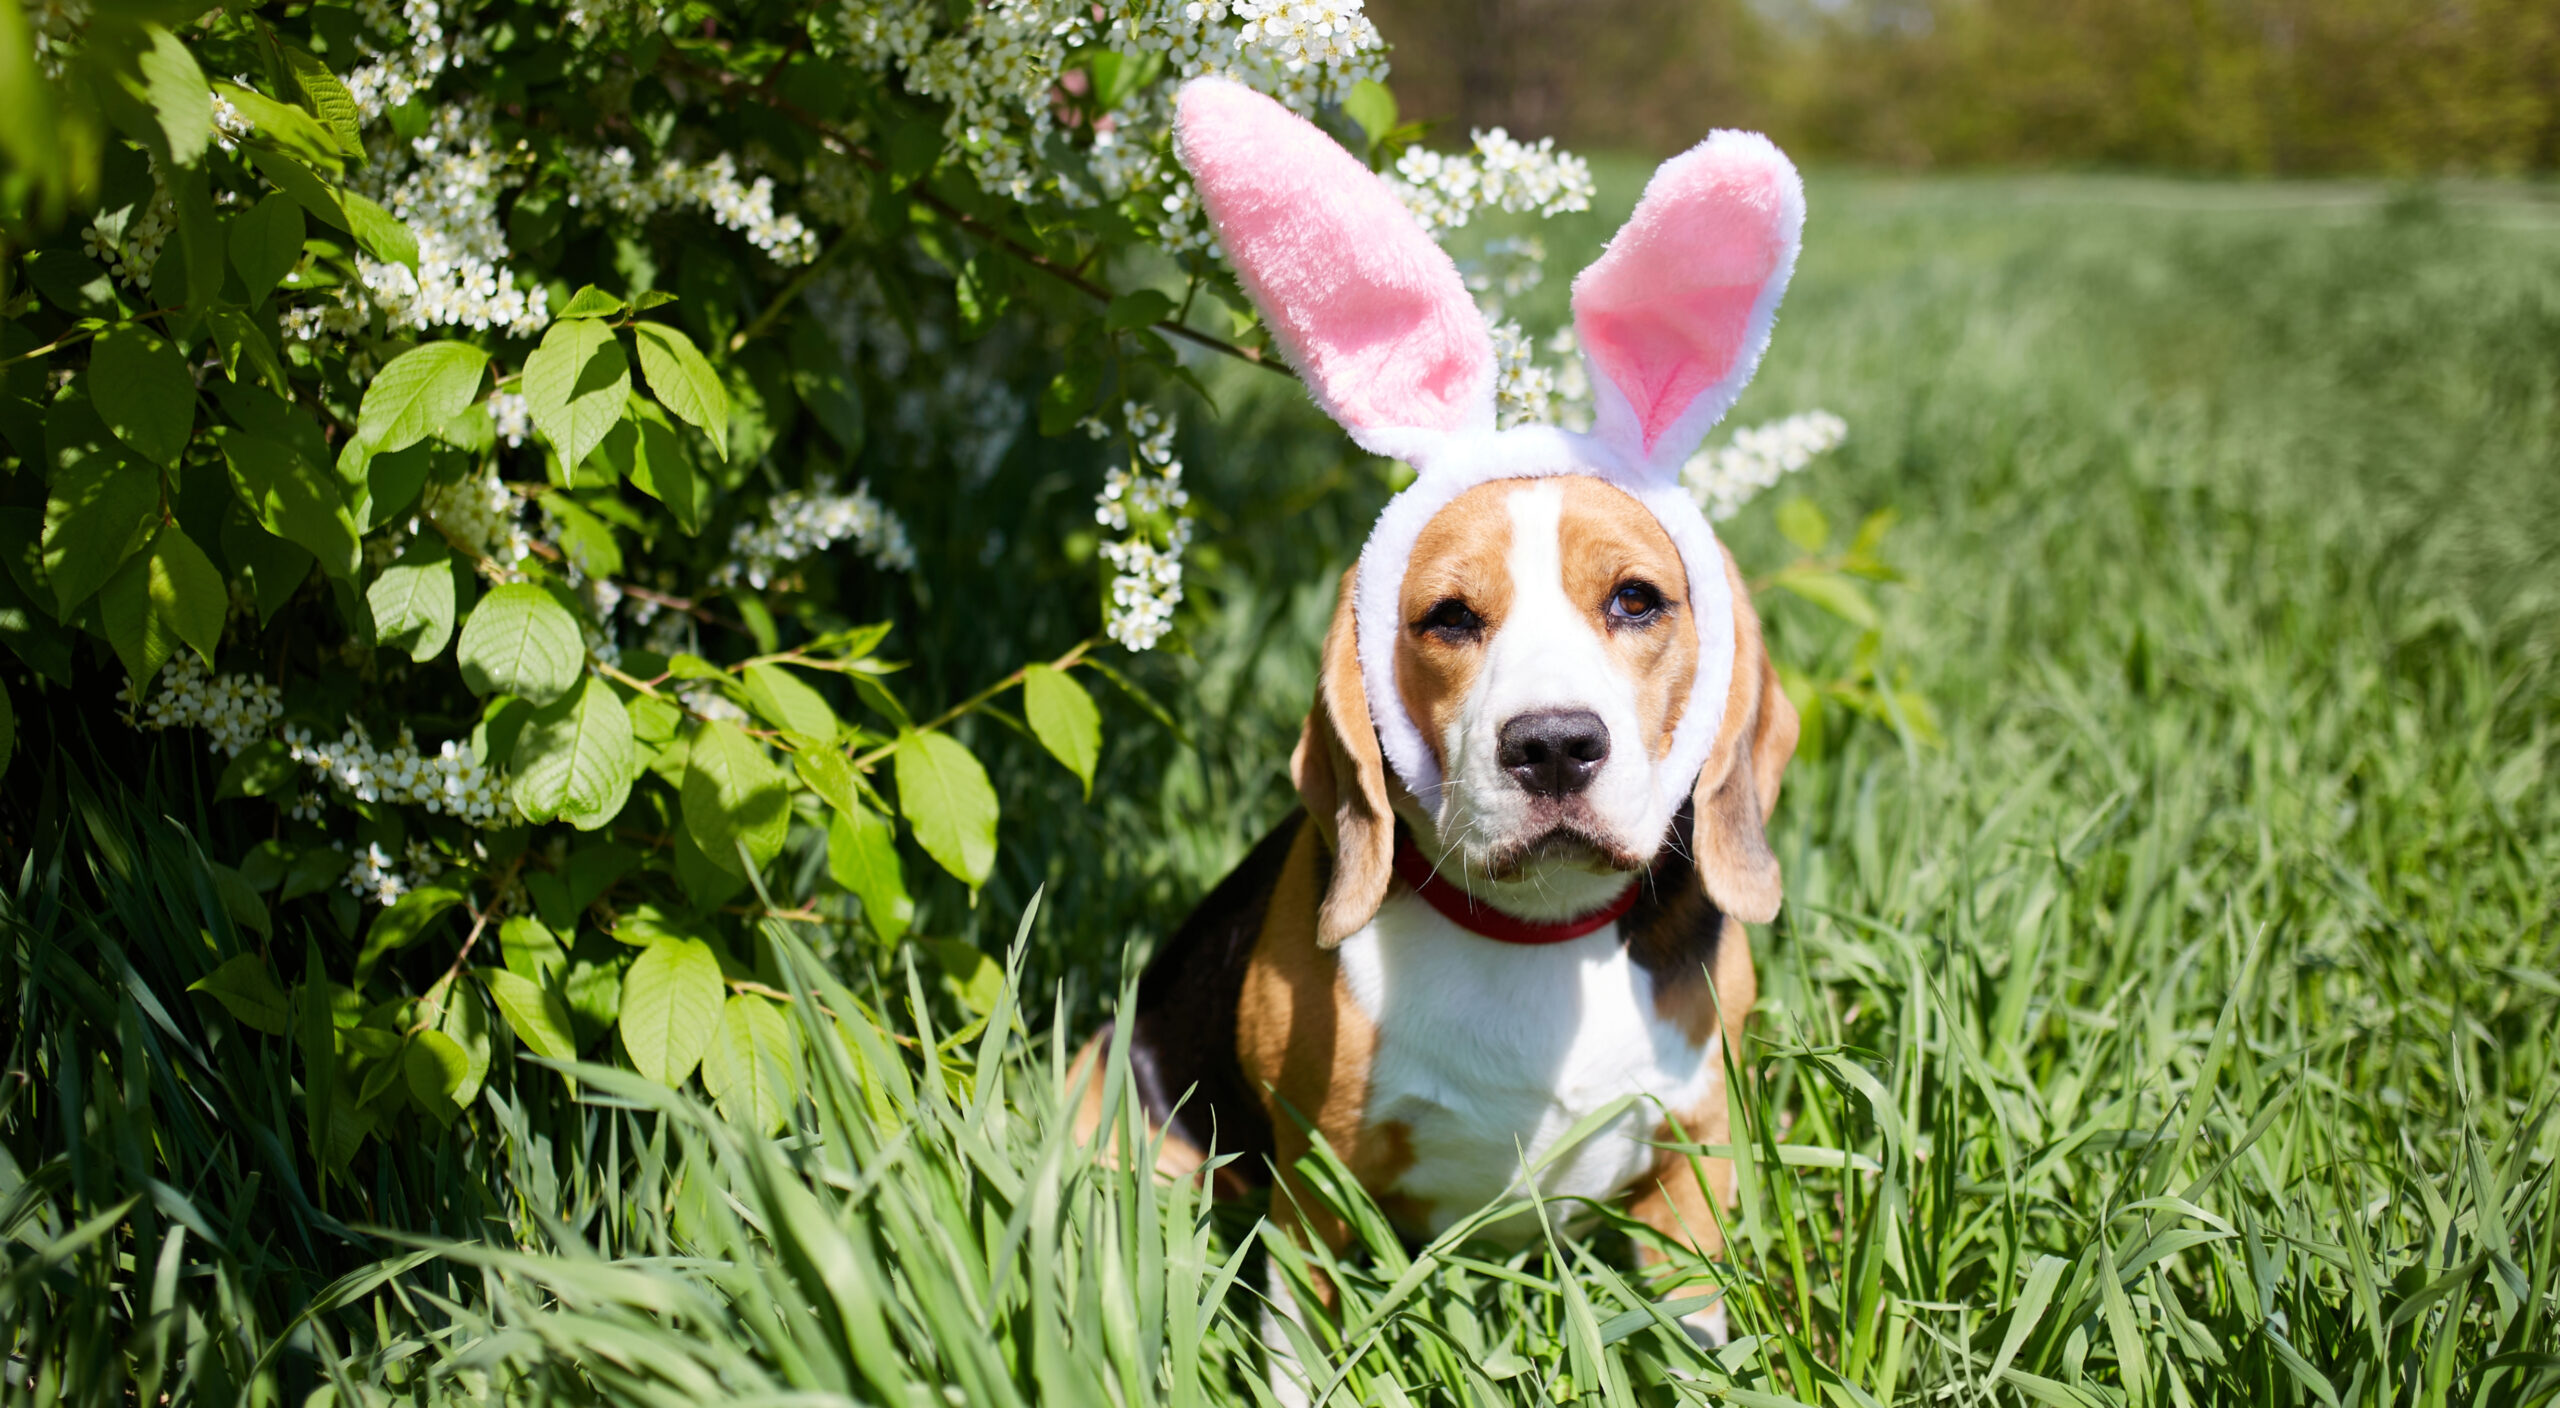 Beagle dog sitting in grass with bunny ears.